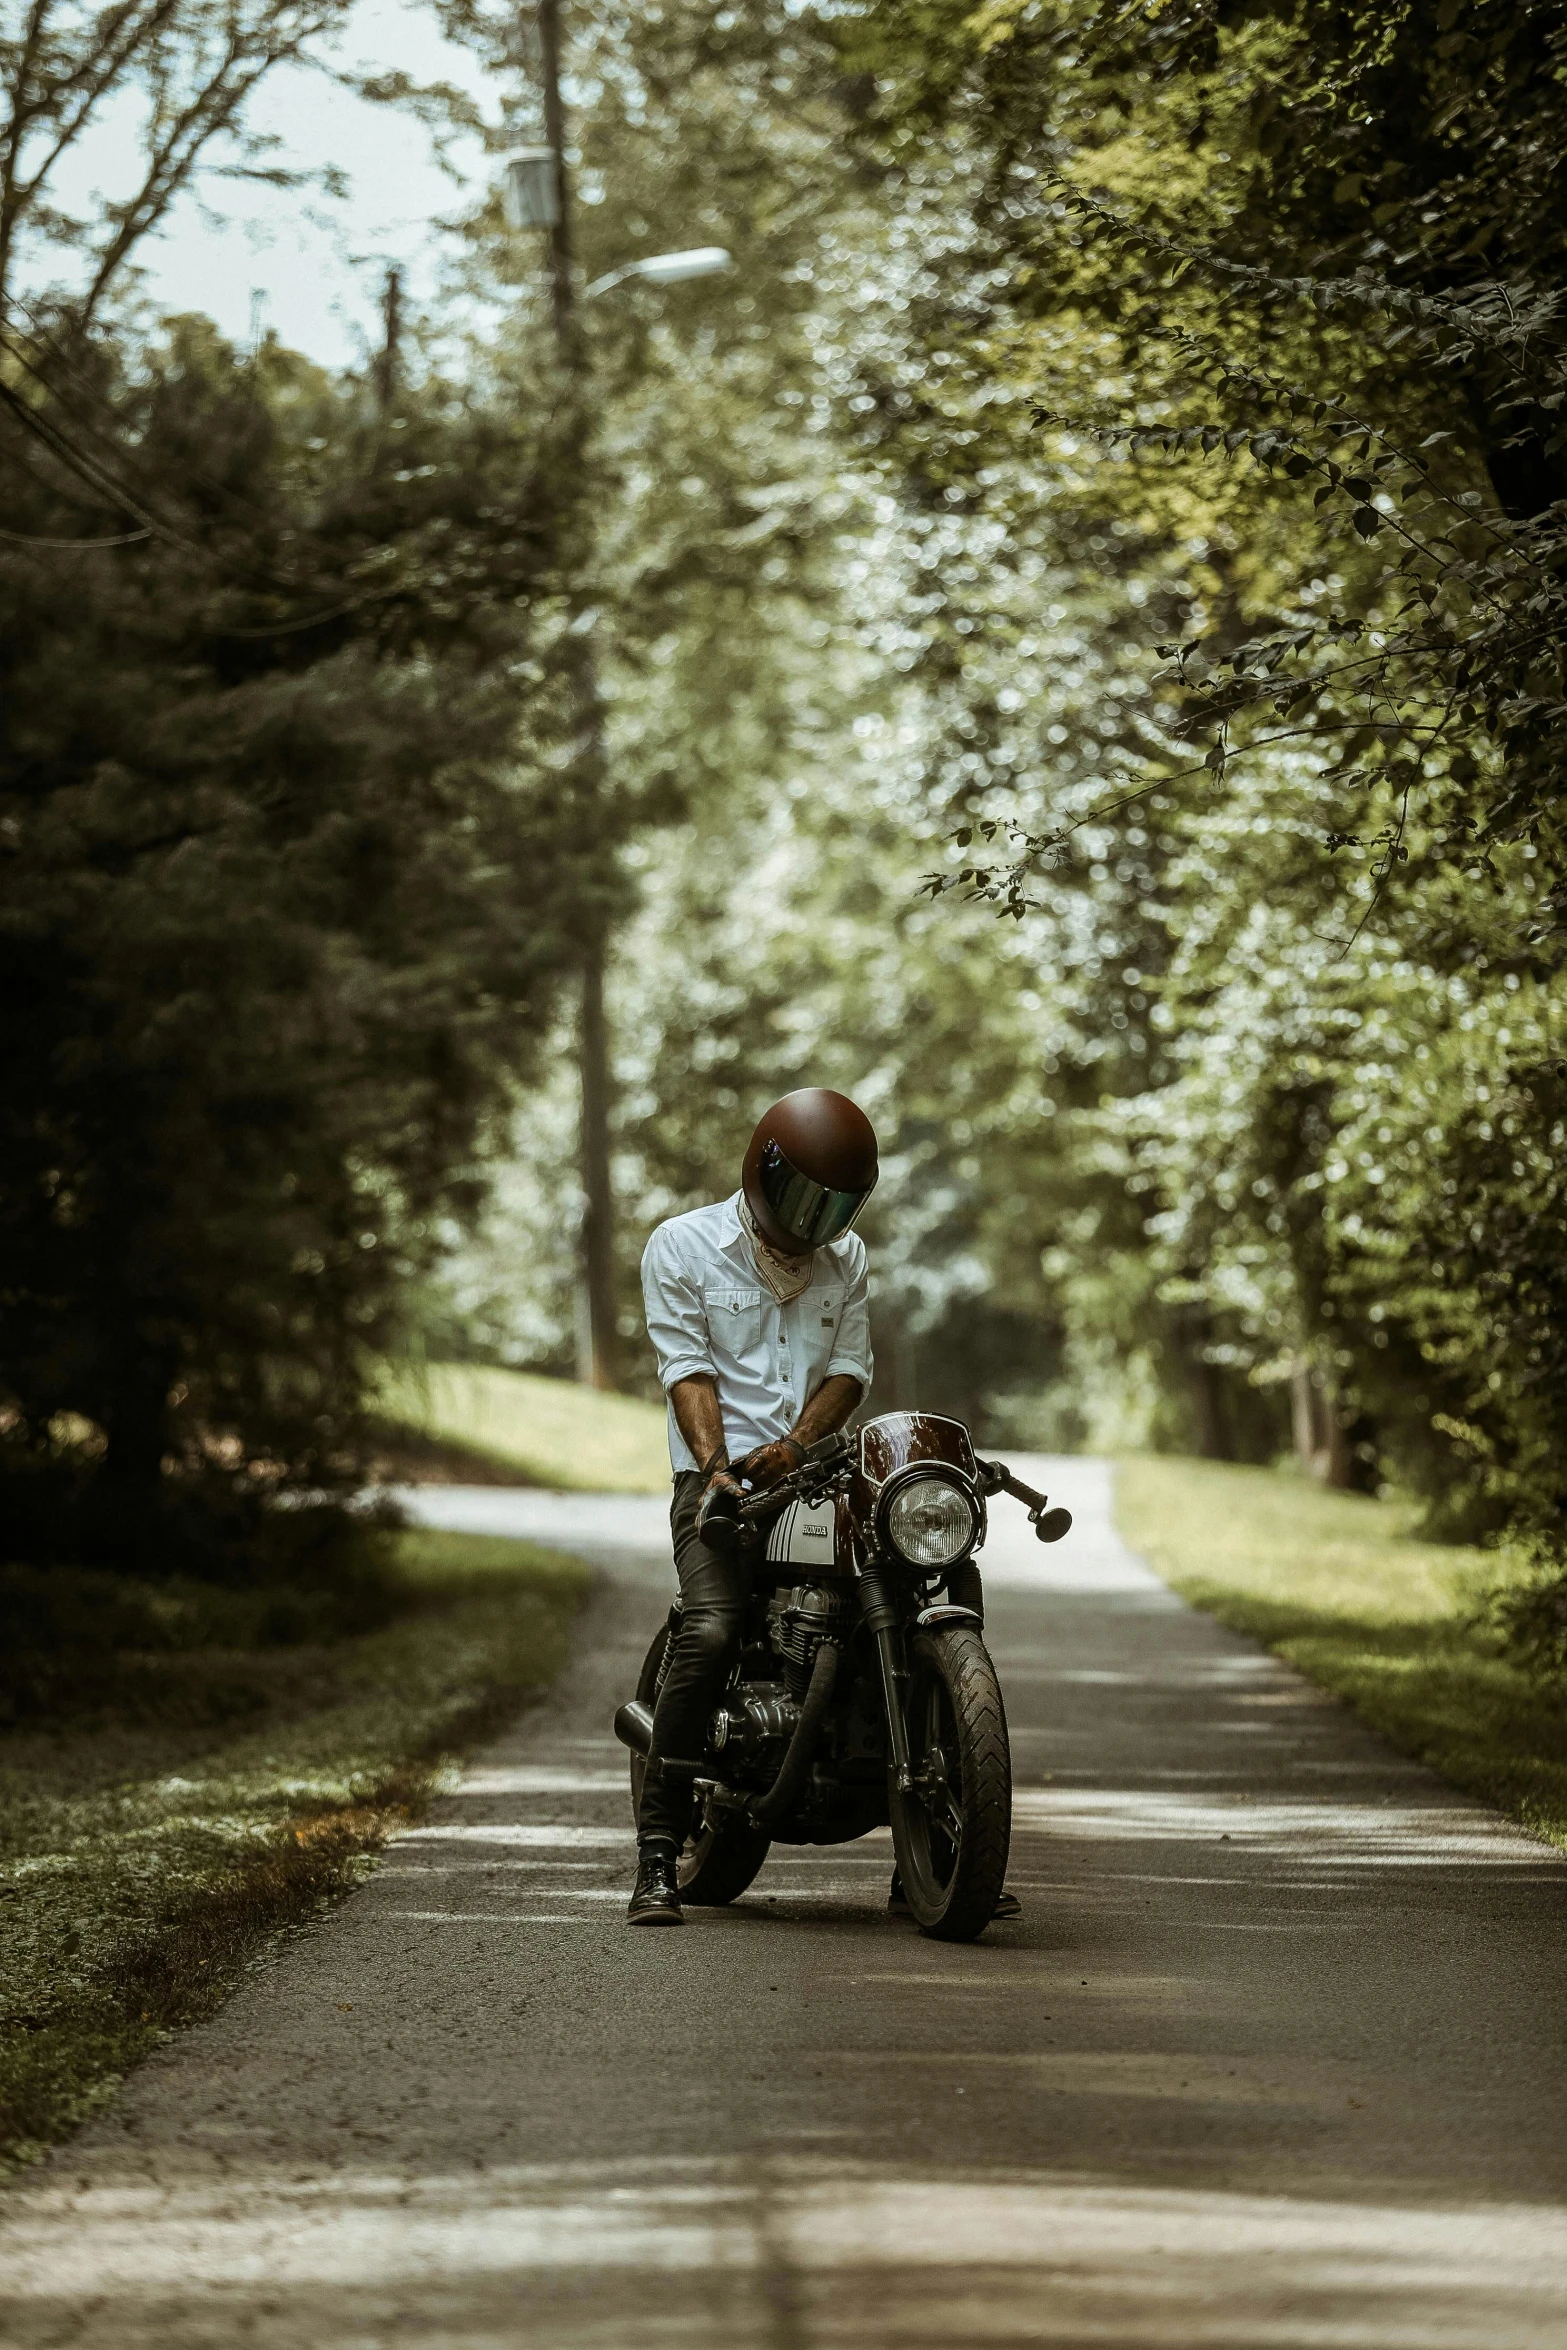 a man riding on the back of a motorcycle down a road, pexels contest winner, in beautiful woods, classic portrait, green, cafe racer